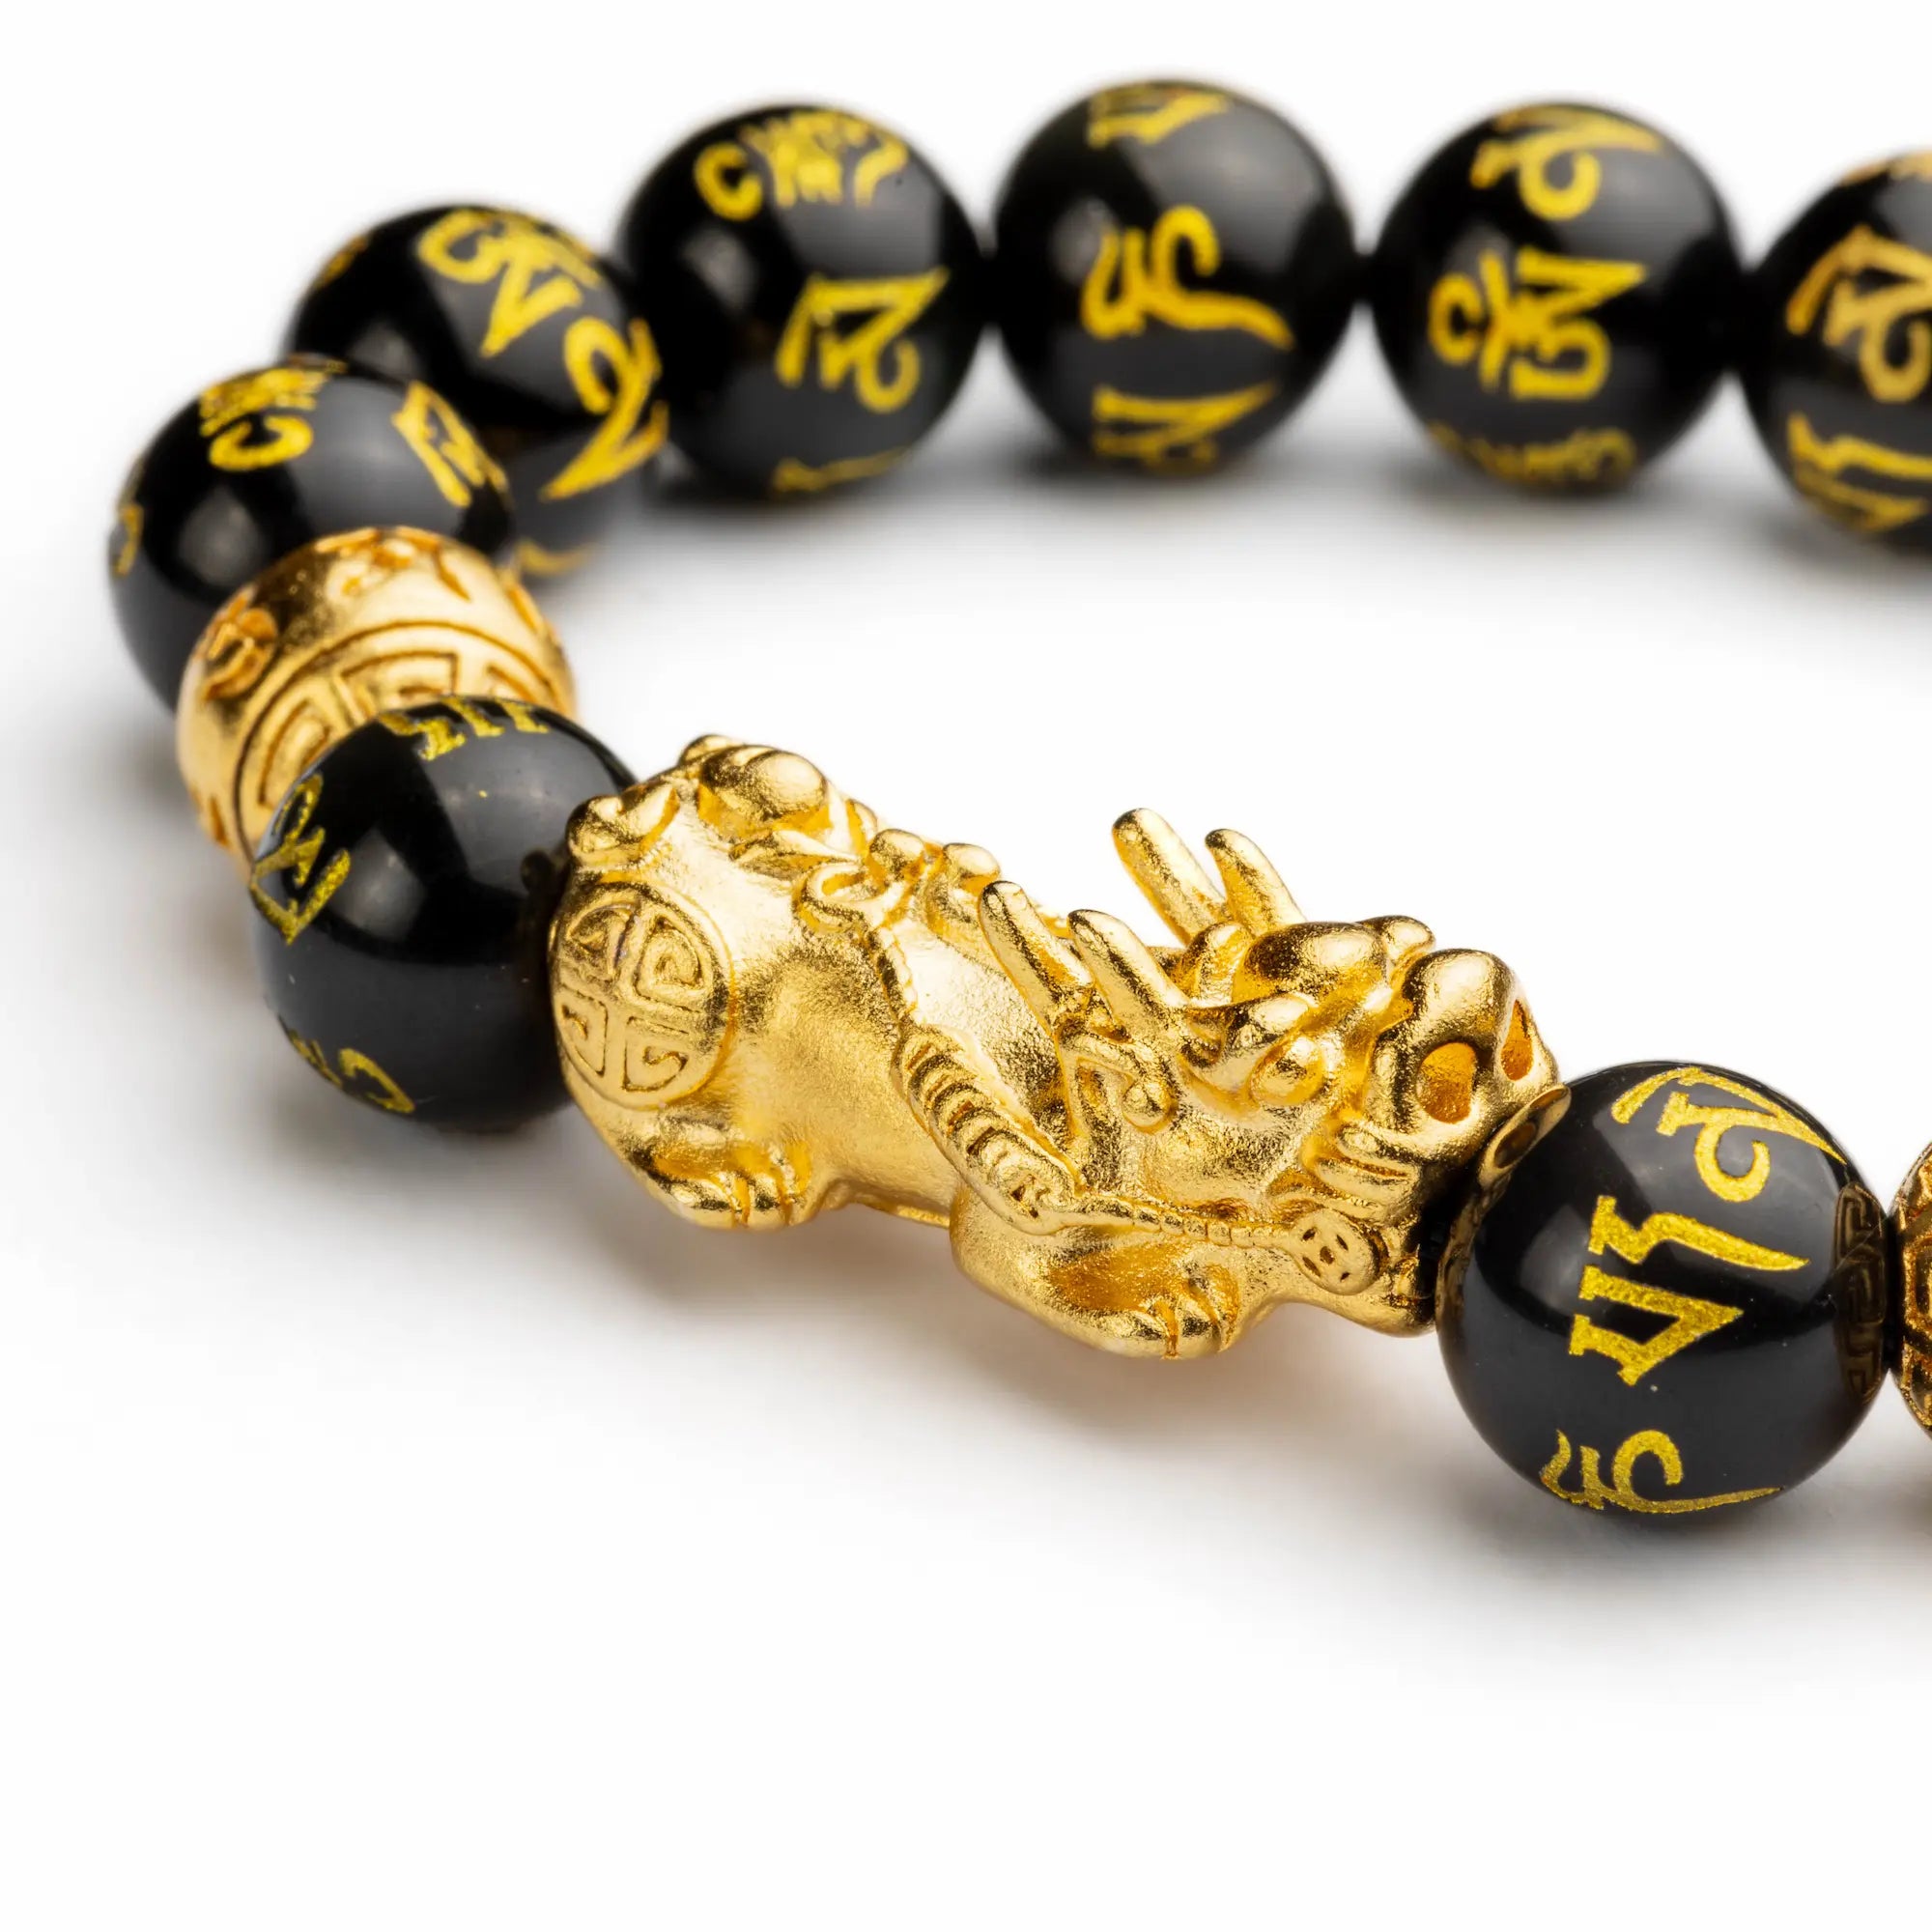 Buy Plus Value Feng Shui Black Obsidian Pixiu Wealth Bracelet for Reiki &  Chakra Crystals Healing (10mm Beads Size, Jute Bag) at Amazon.in